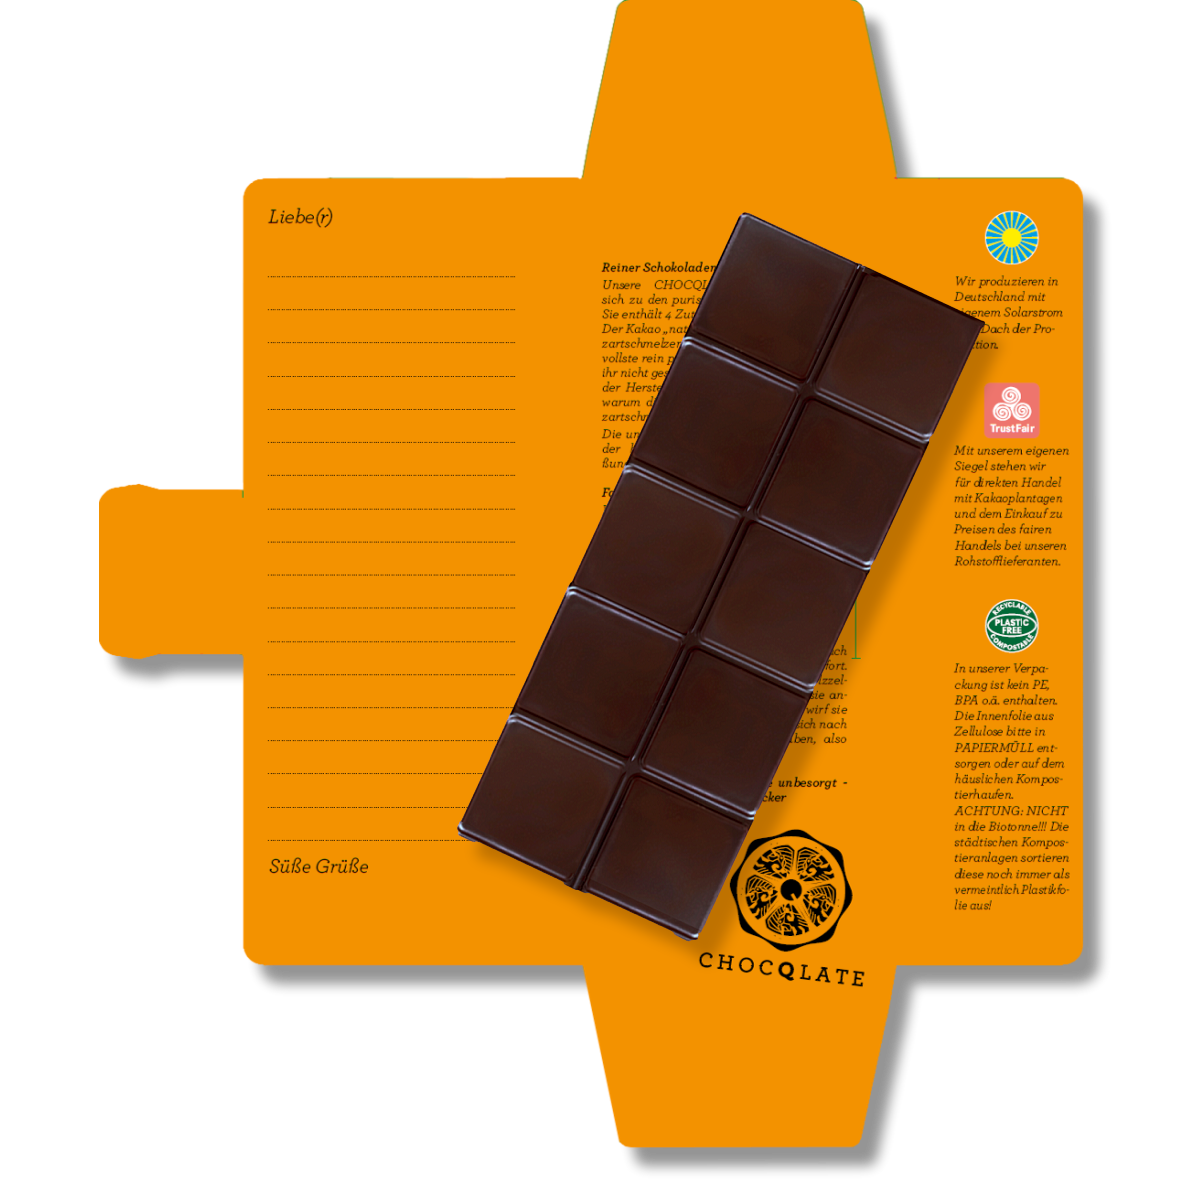 SweetGreets Organic Chocolate with Greeting Card "Friends for Life"